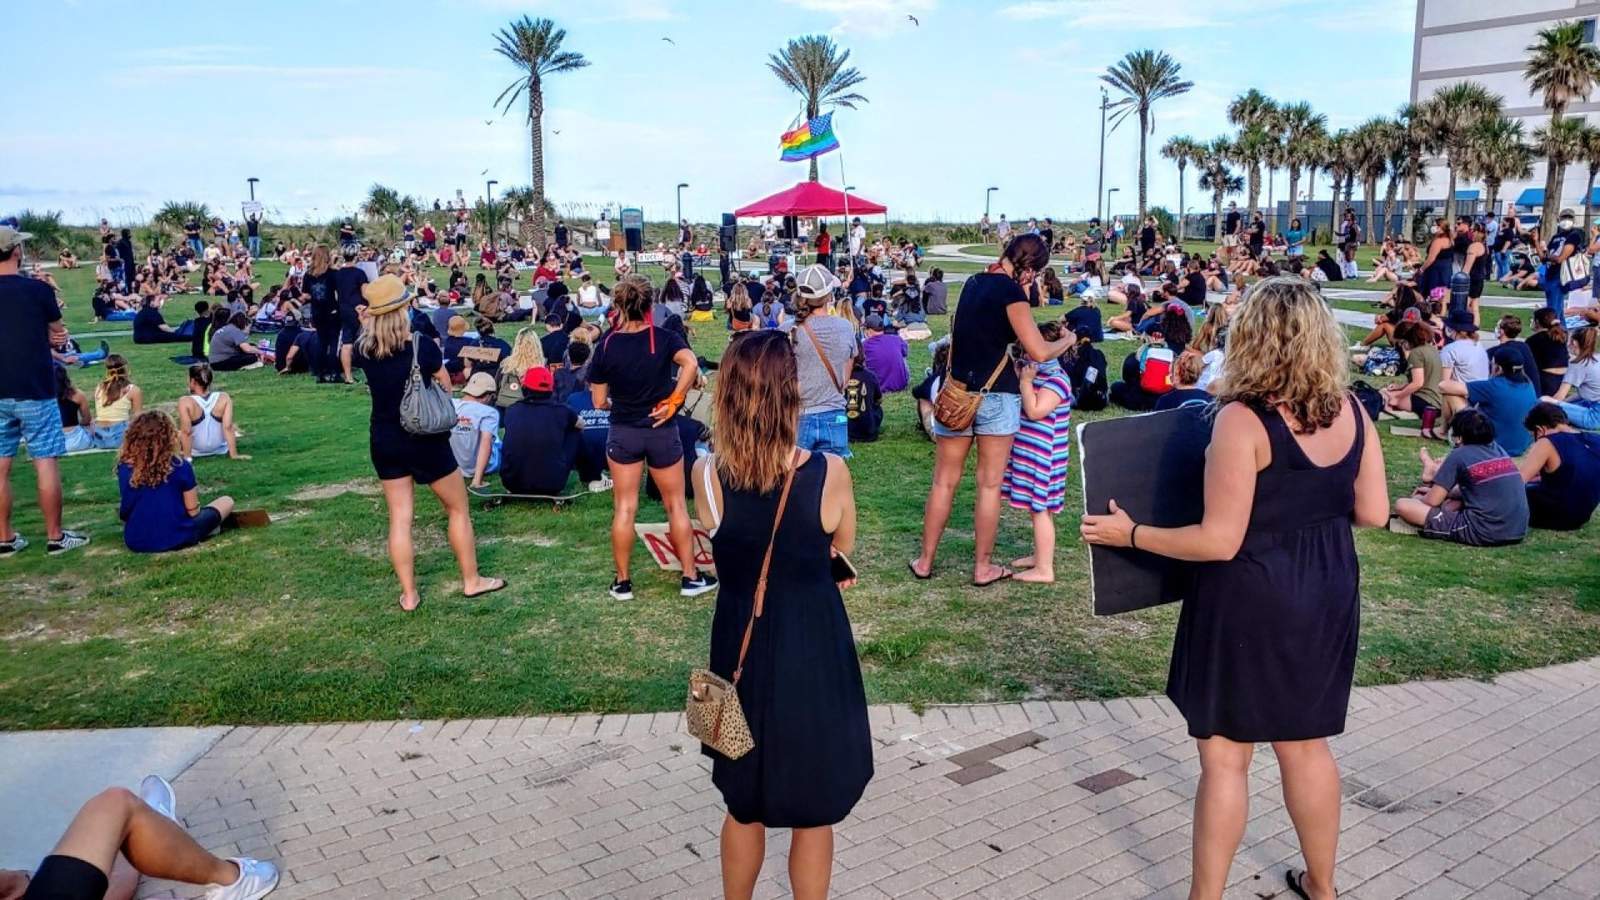 Demonstrators gather for a peaceful protest at the SeaWalk Pavilion